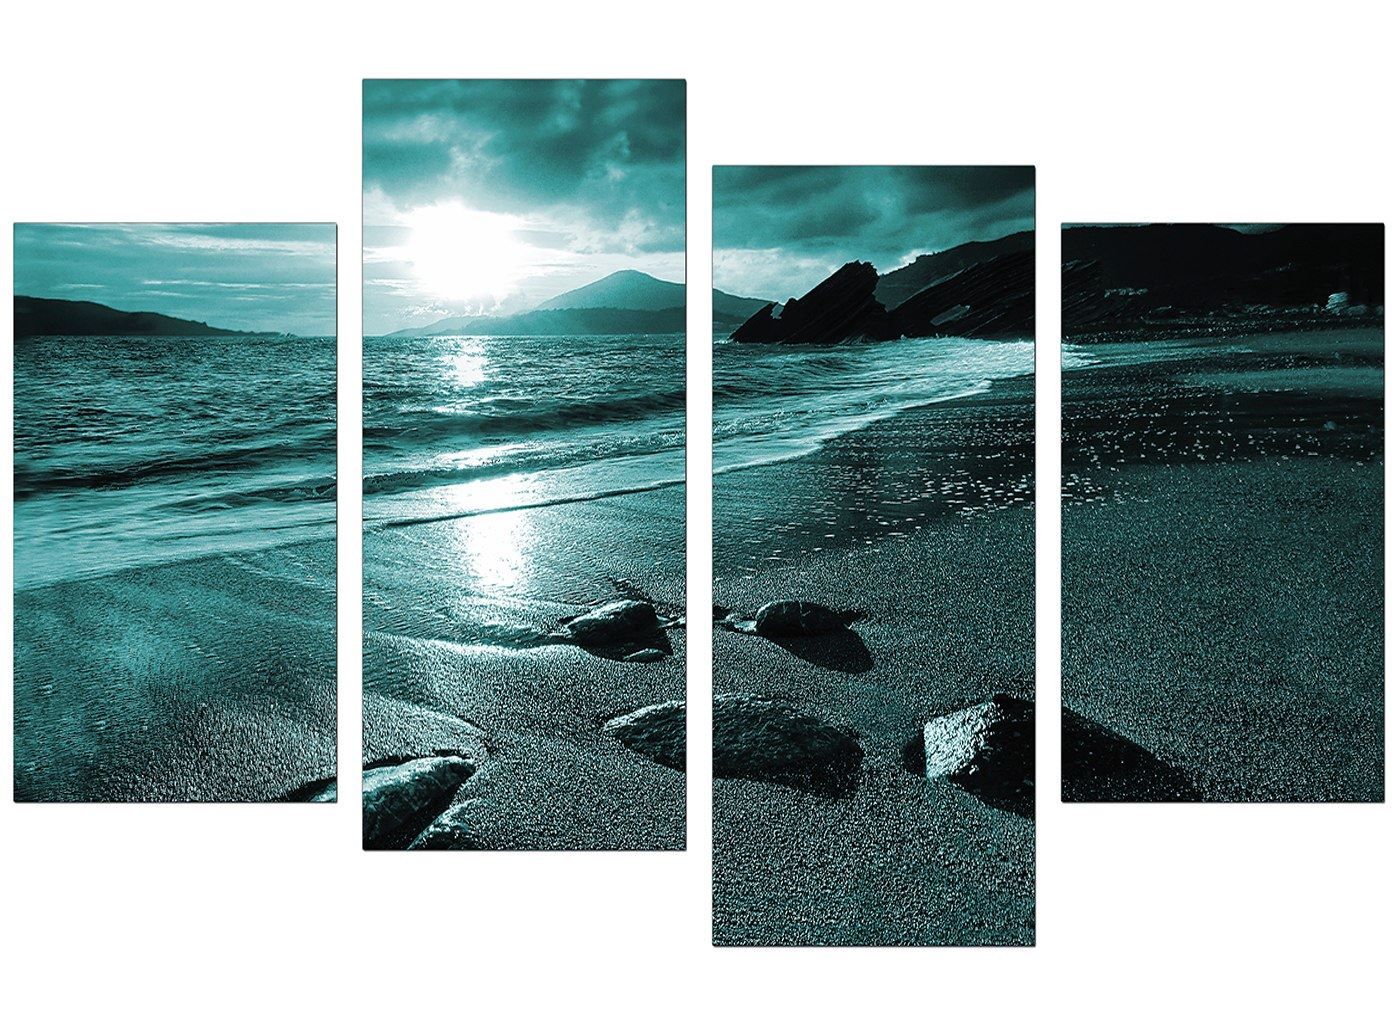 Large Teal Landscape Canvas Wall Art Pictures Xl 130cm Intended For Most Recent Landscape Wall Art (View 20 of 20)